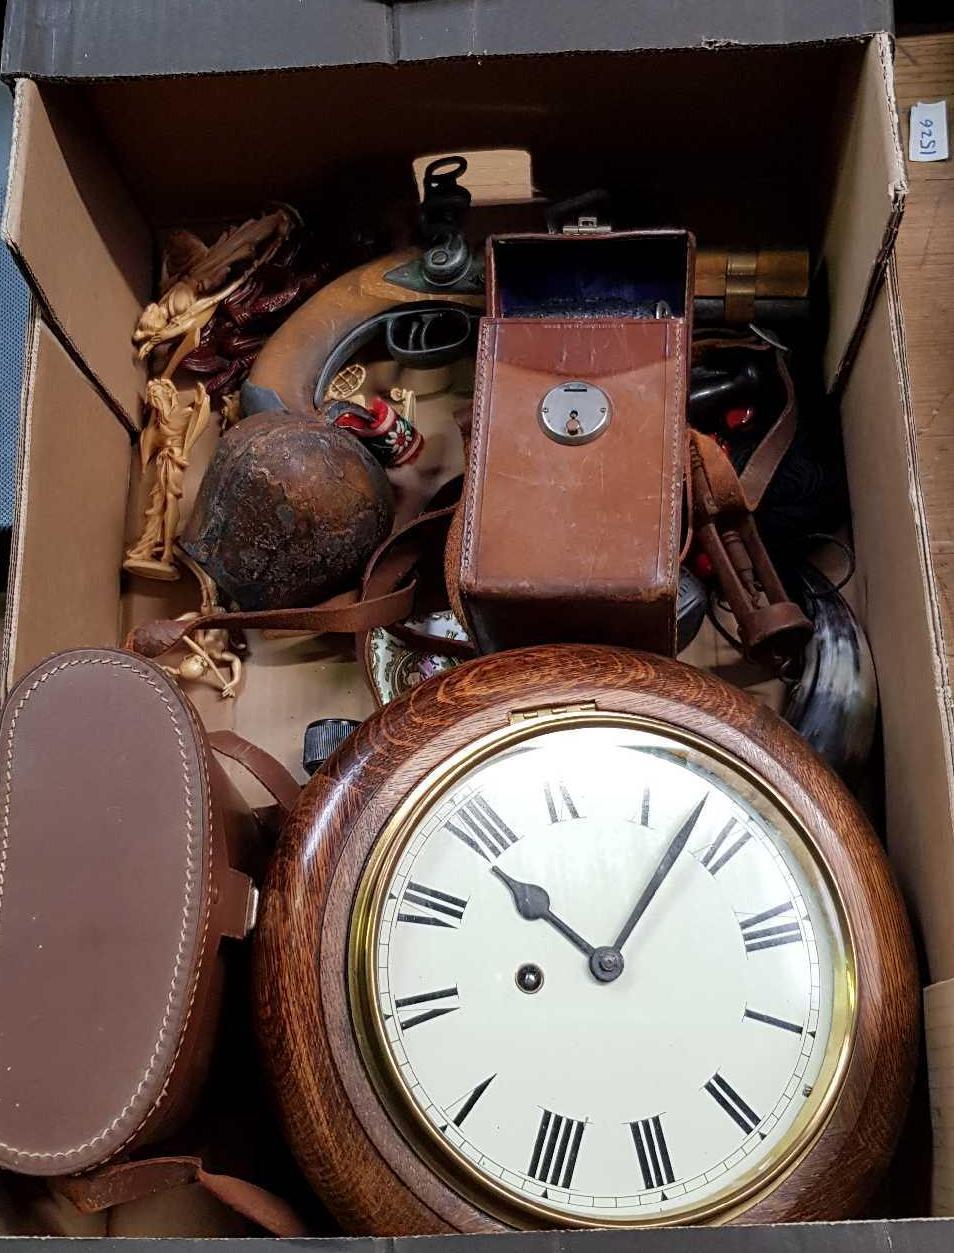 CARTON WITH MISC ITEMS INCL; WALL CLOCK, VINTAGE CORK SCREW, PAIR OF 10 X 50 BINOCULARS IN CASE,